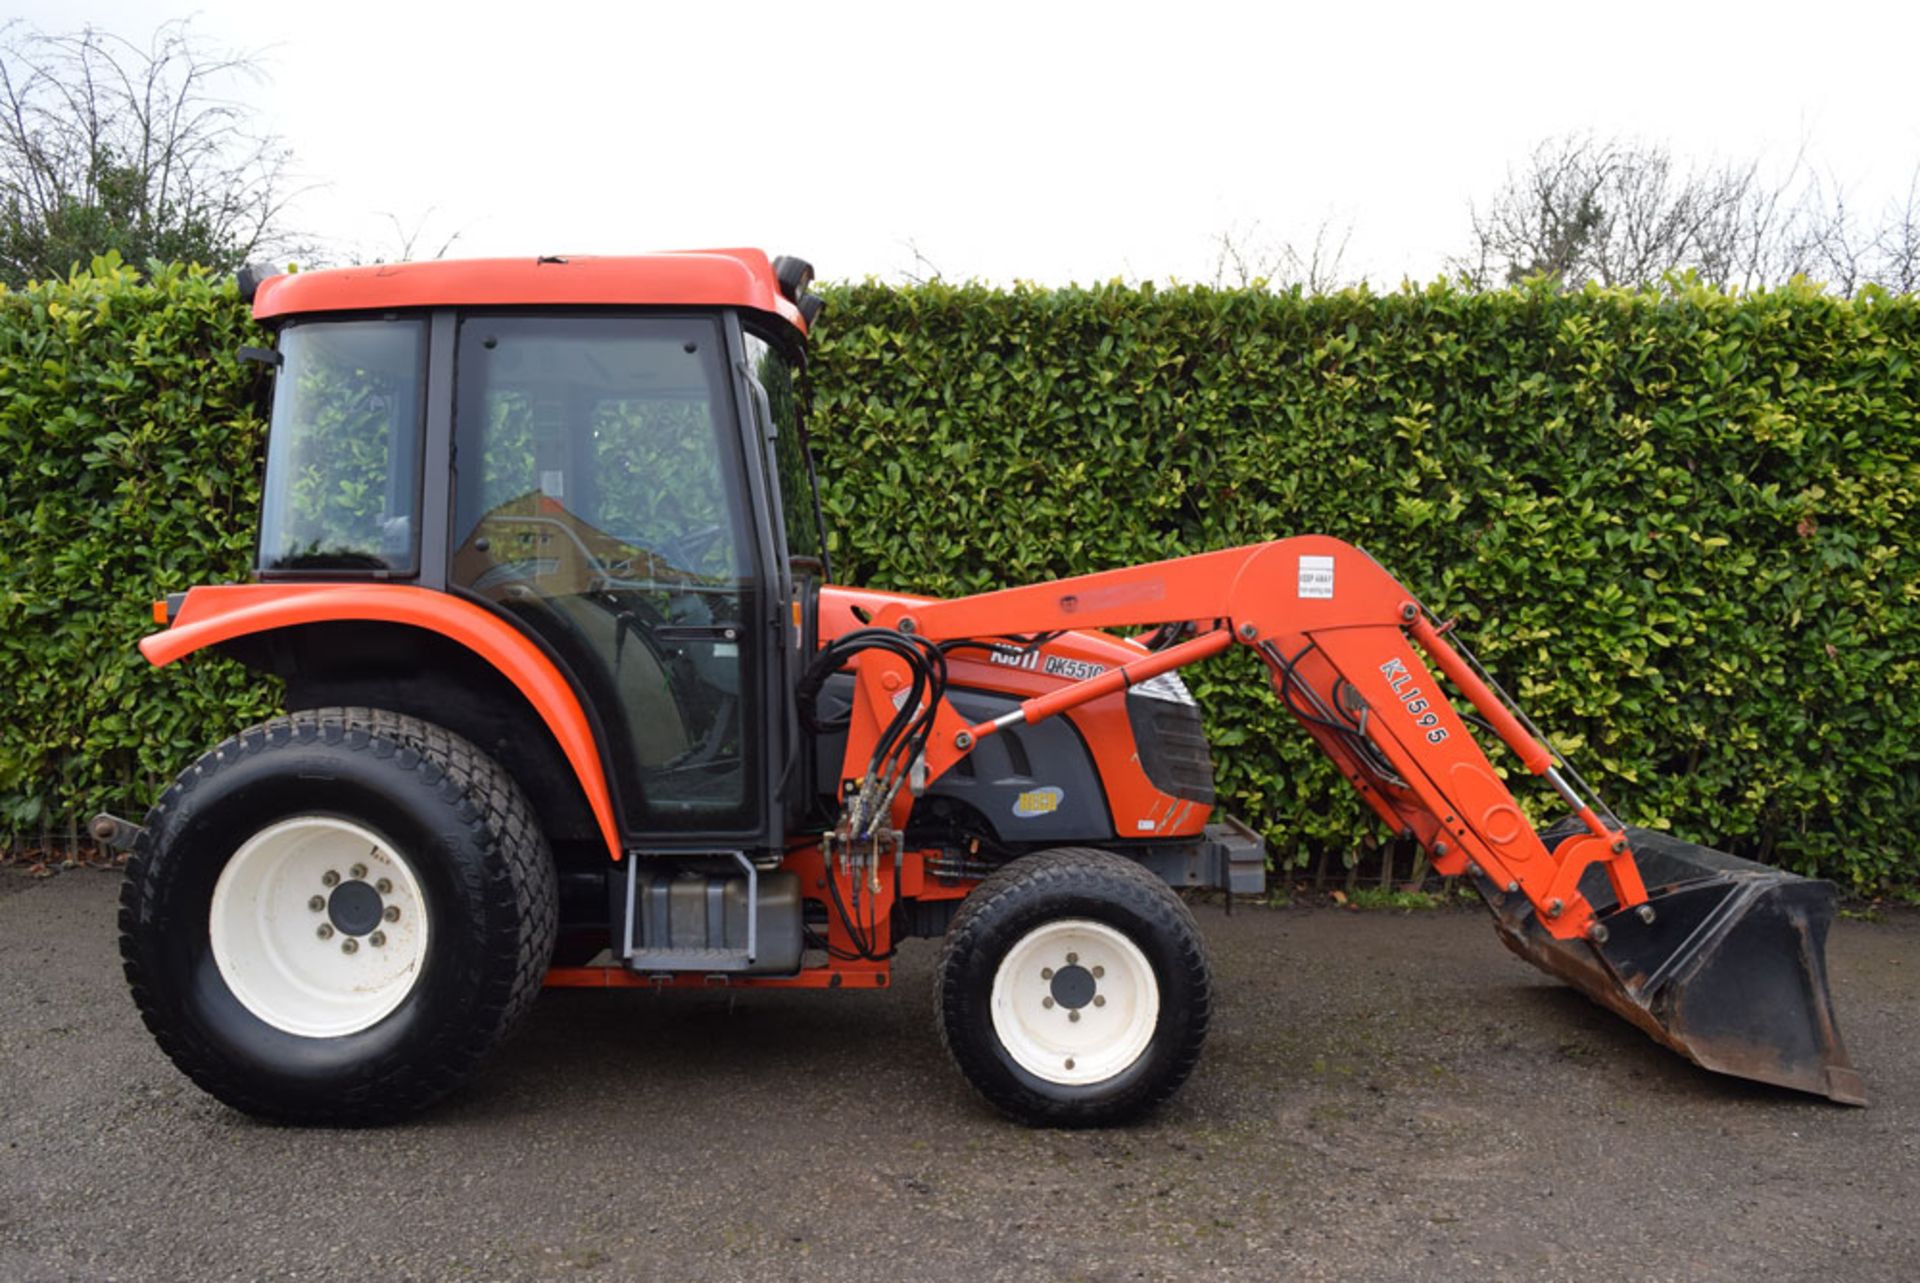 Kioti DK551C Compact Tractor With KL1595 Loader - ***Reserve lowered***